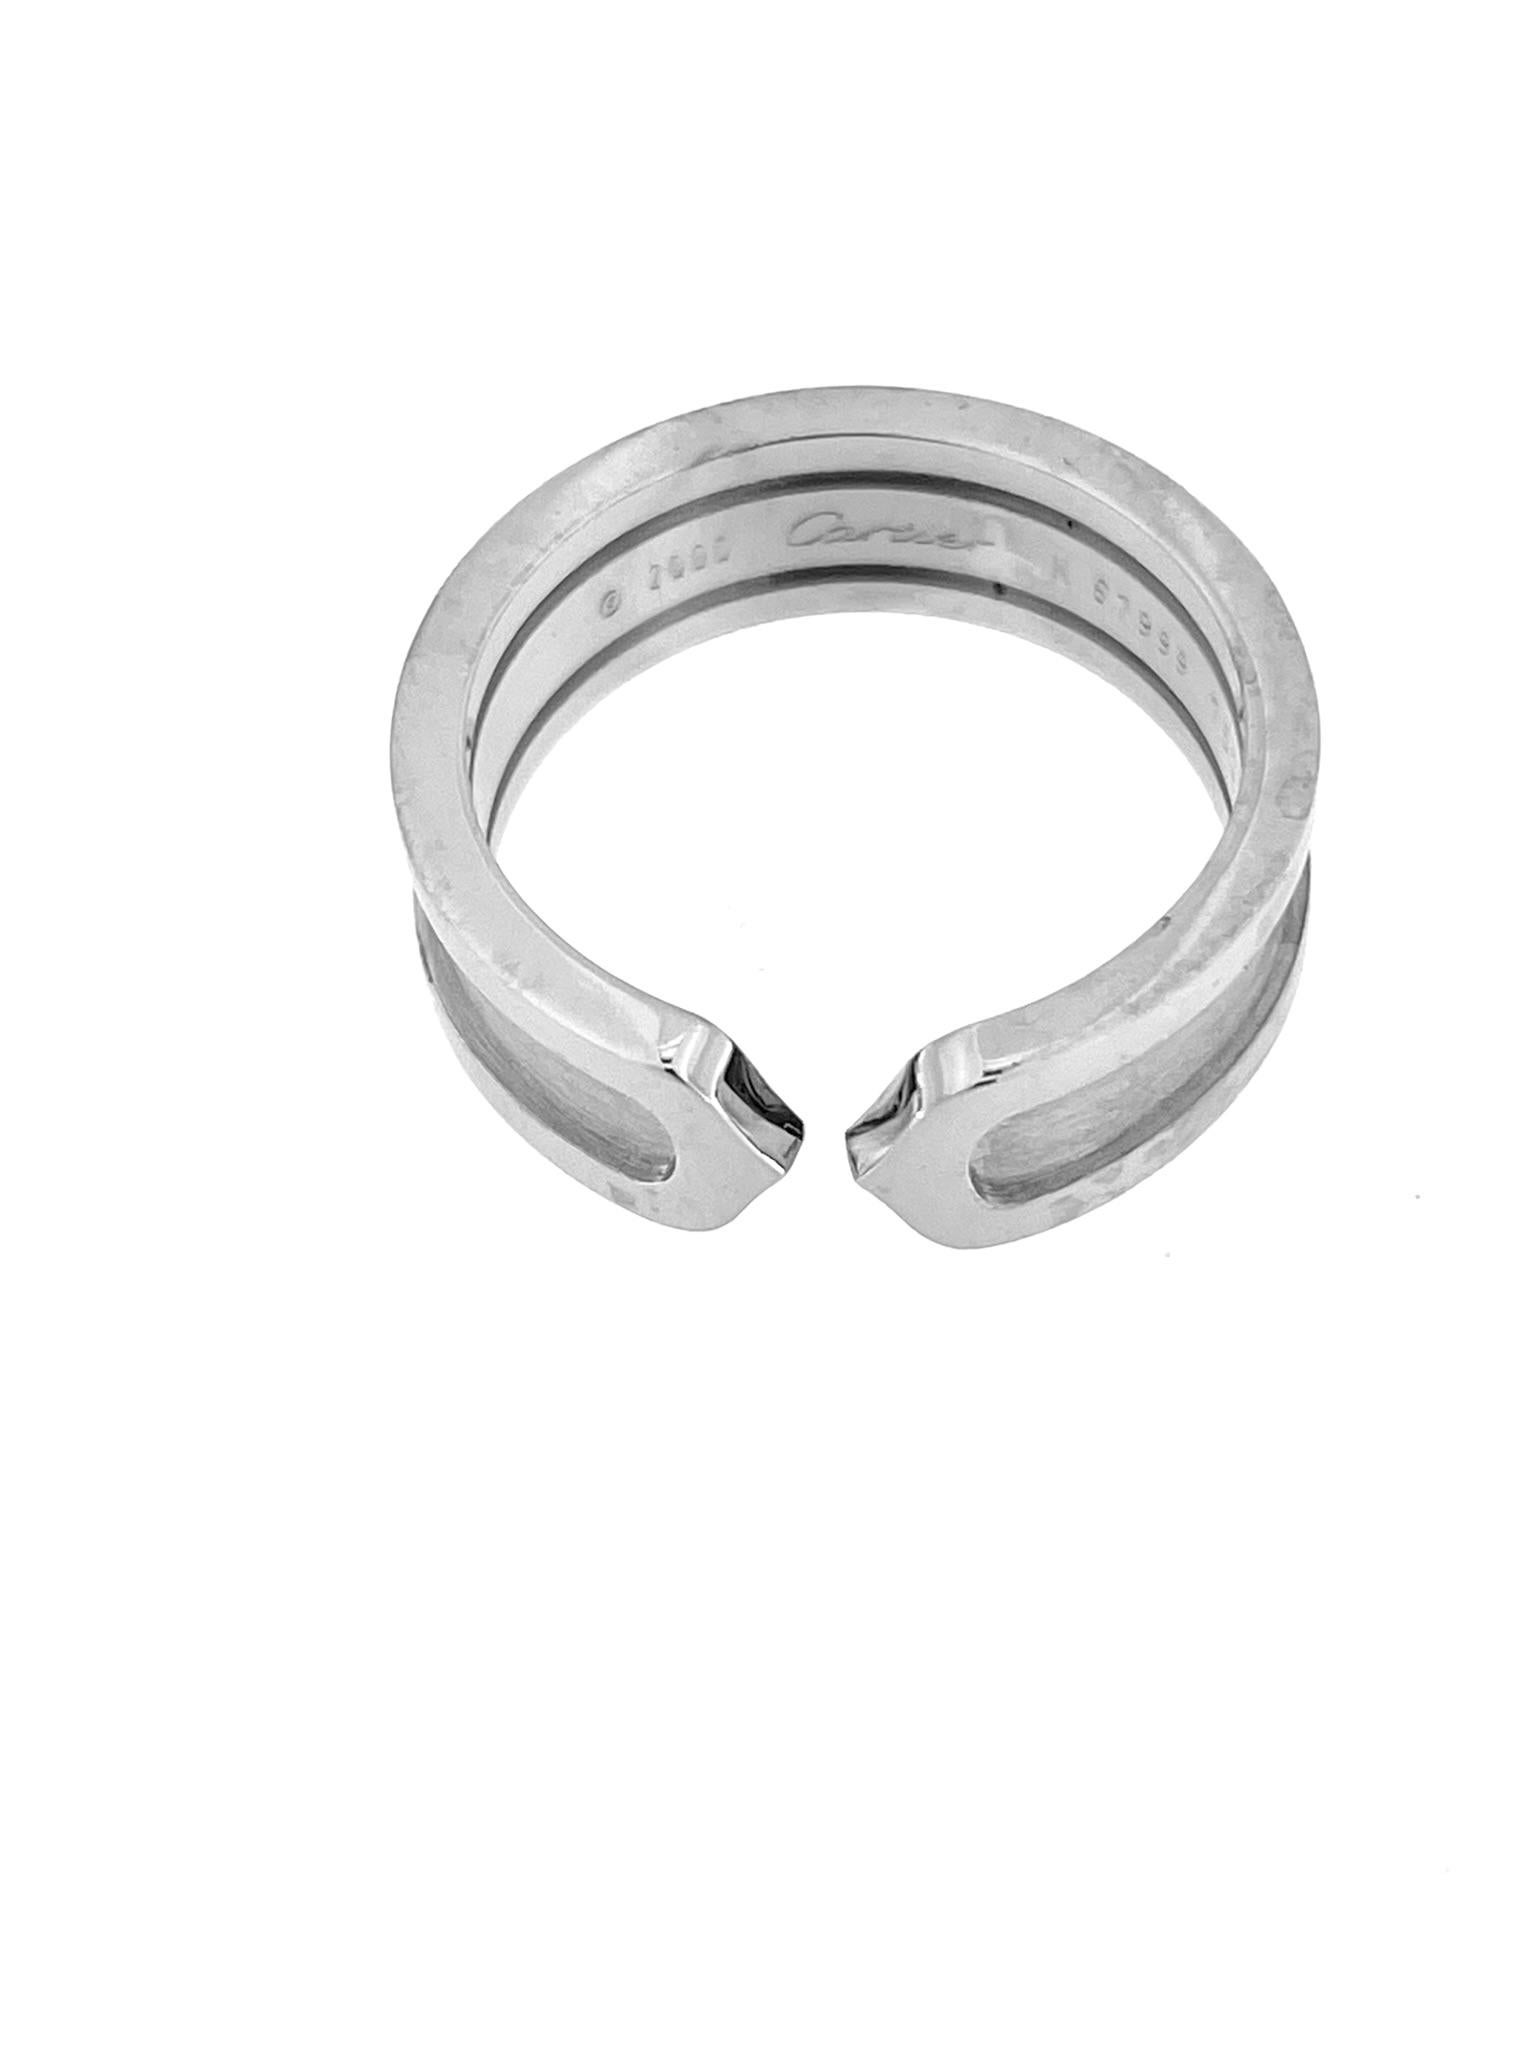 The Cartier C Collection Ring in 18-karat white gold is a stylish and contemporary piece of jewelry designed by Cartier, the renowned French luxury brand. The 